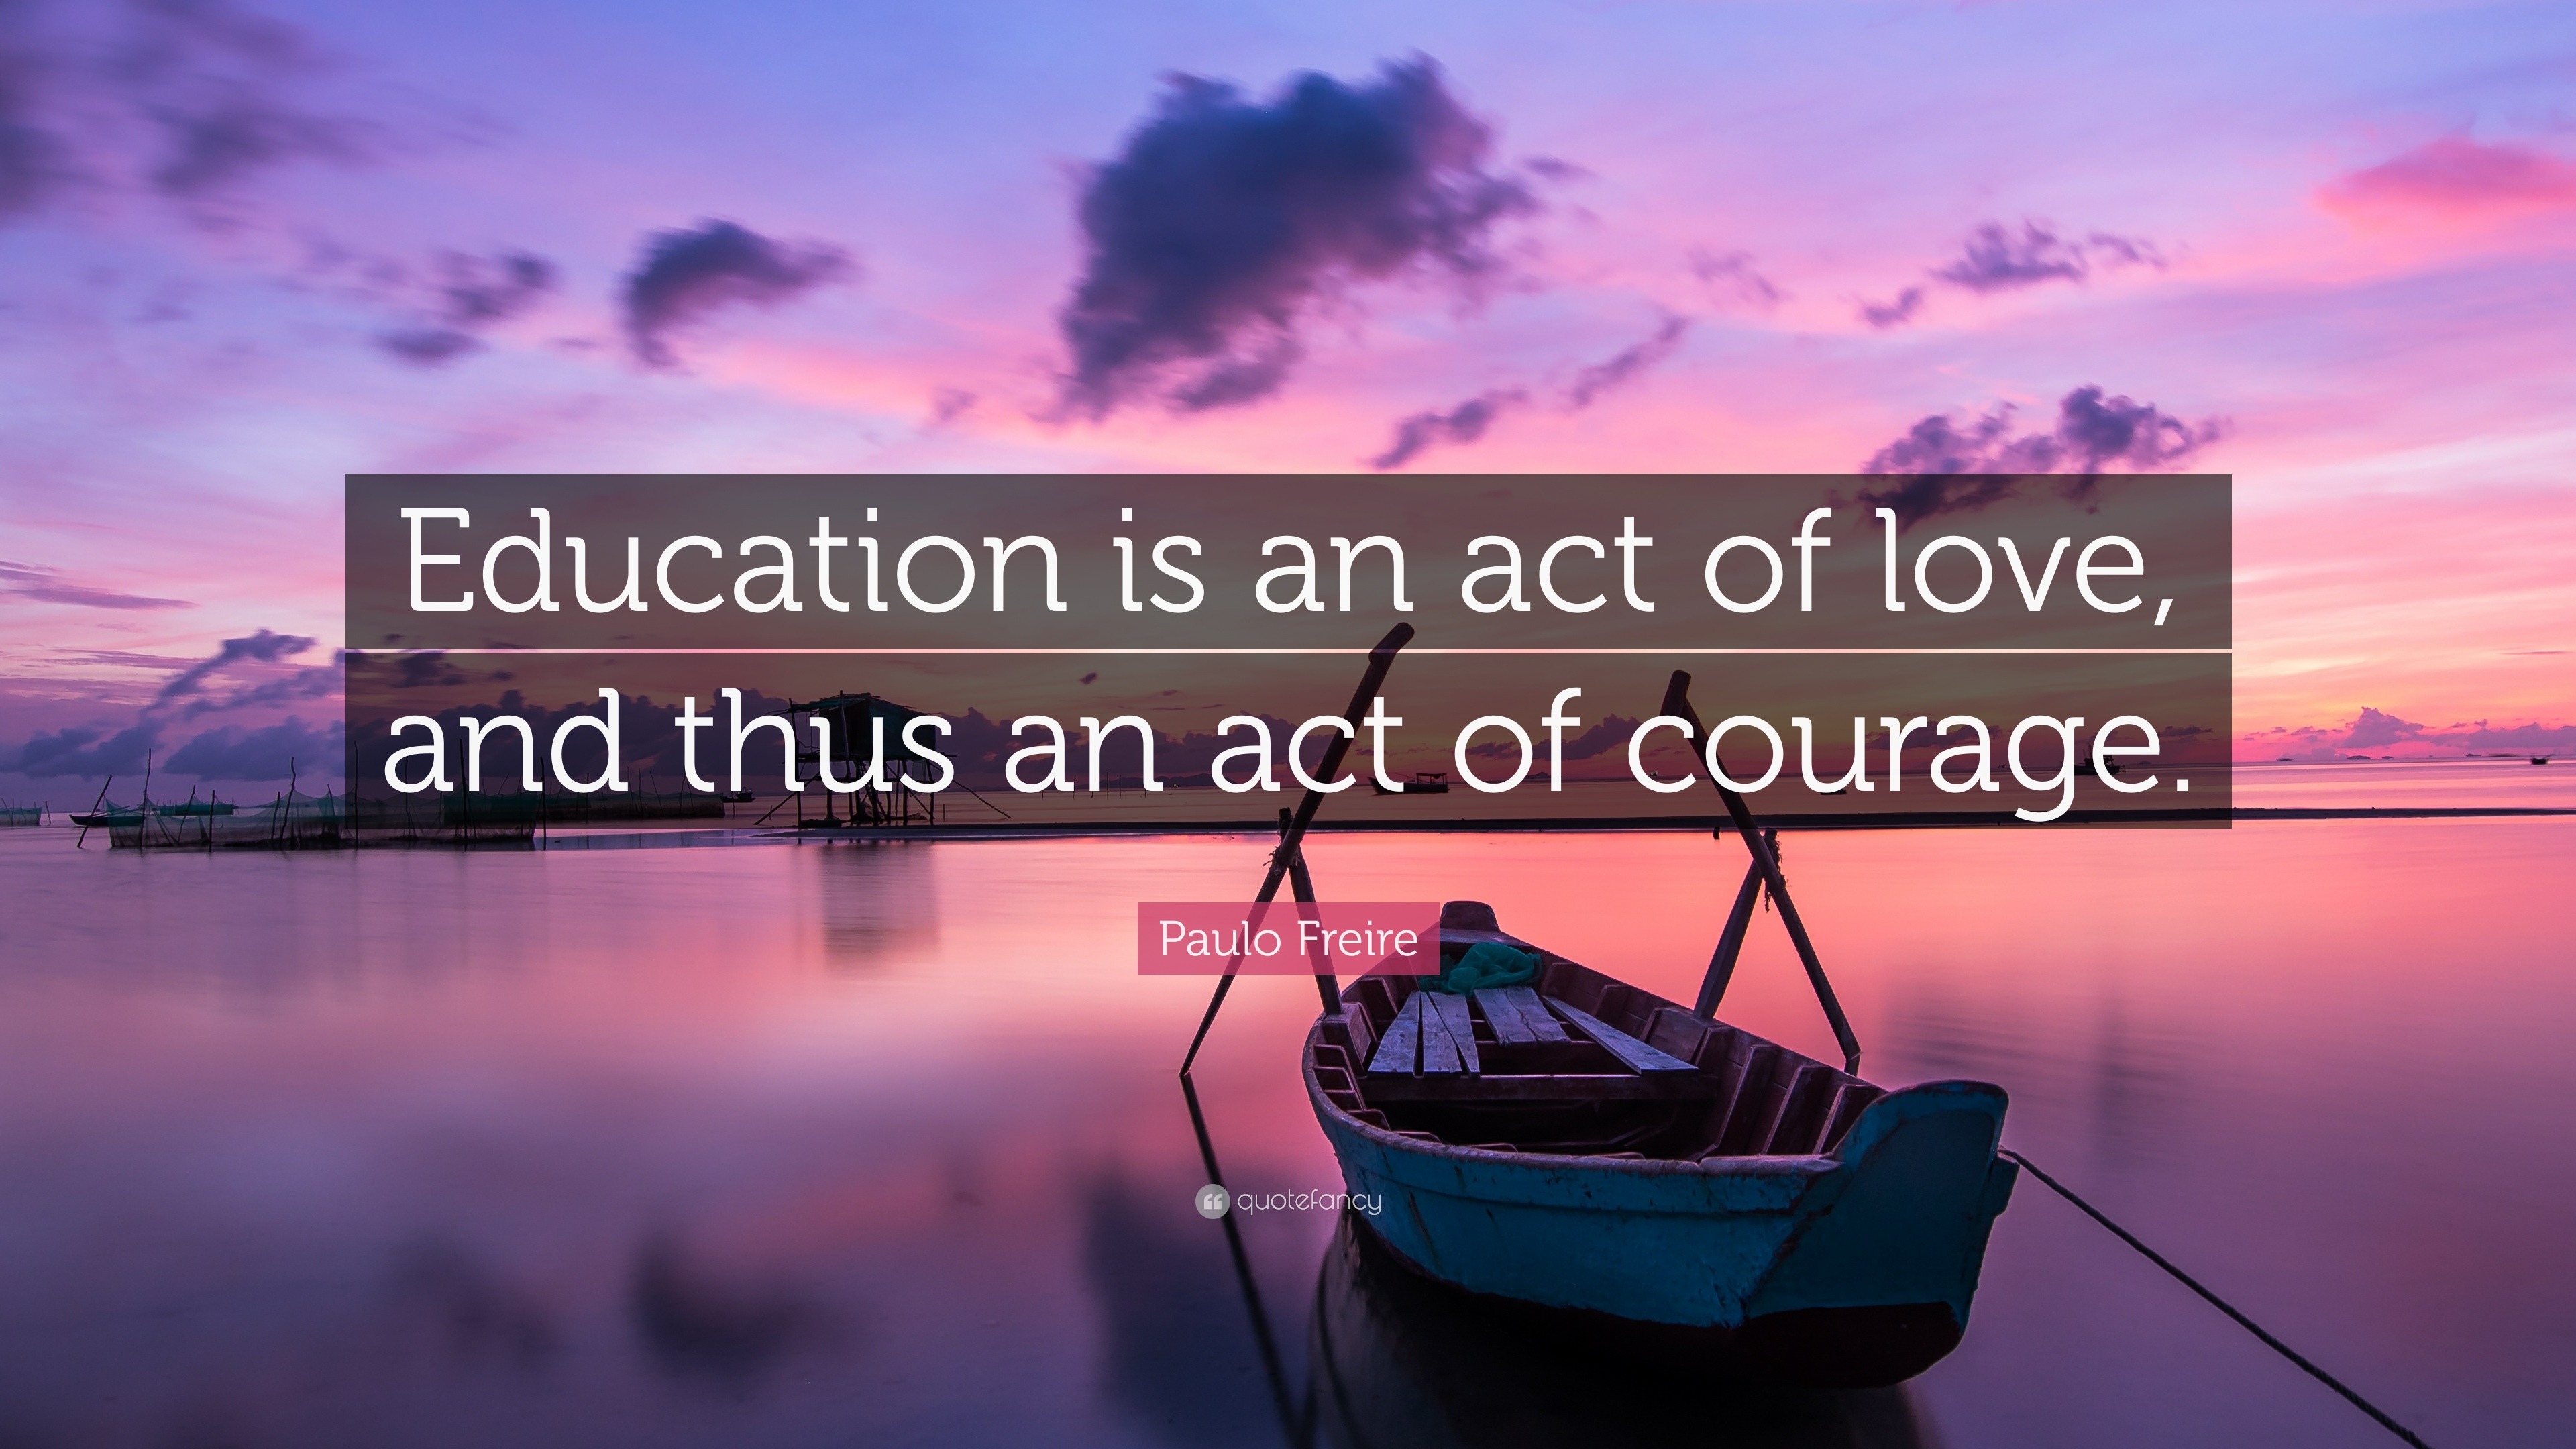 Paulo Freire Quote: “Education is an act of love, and thus an act of